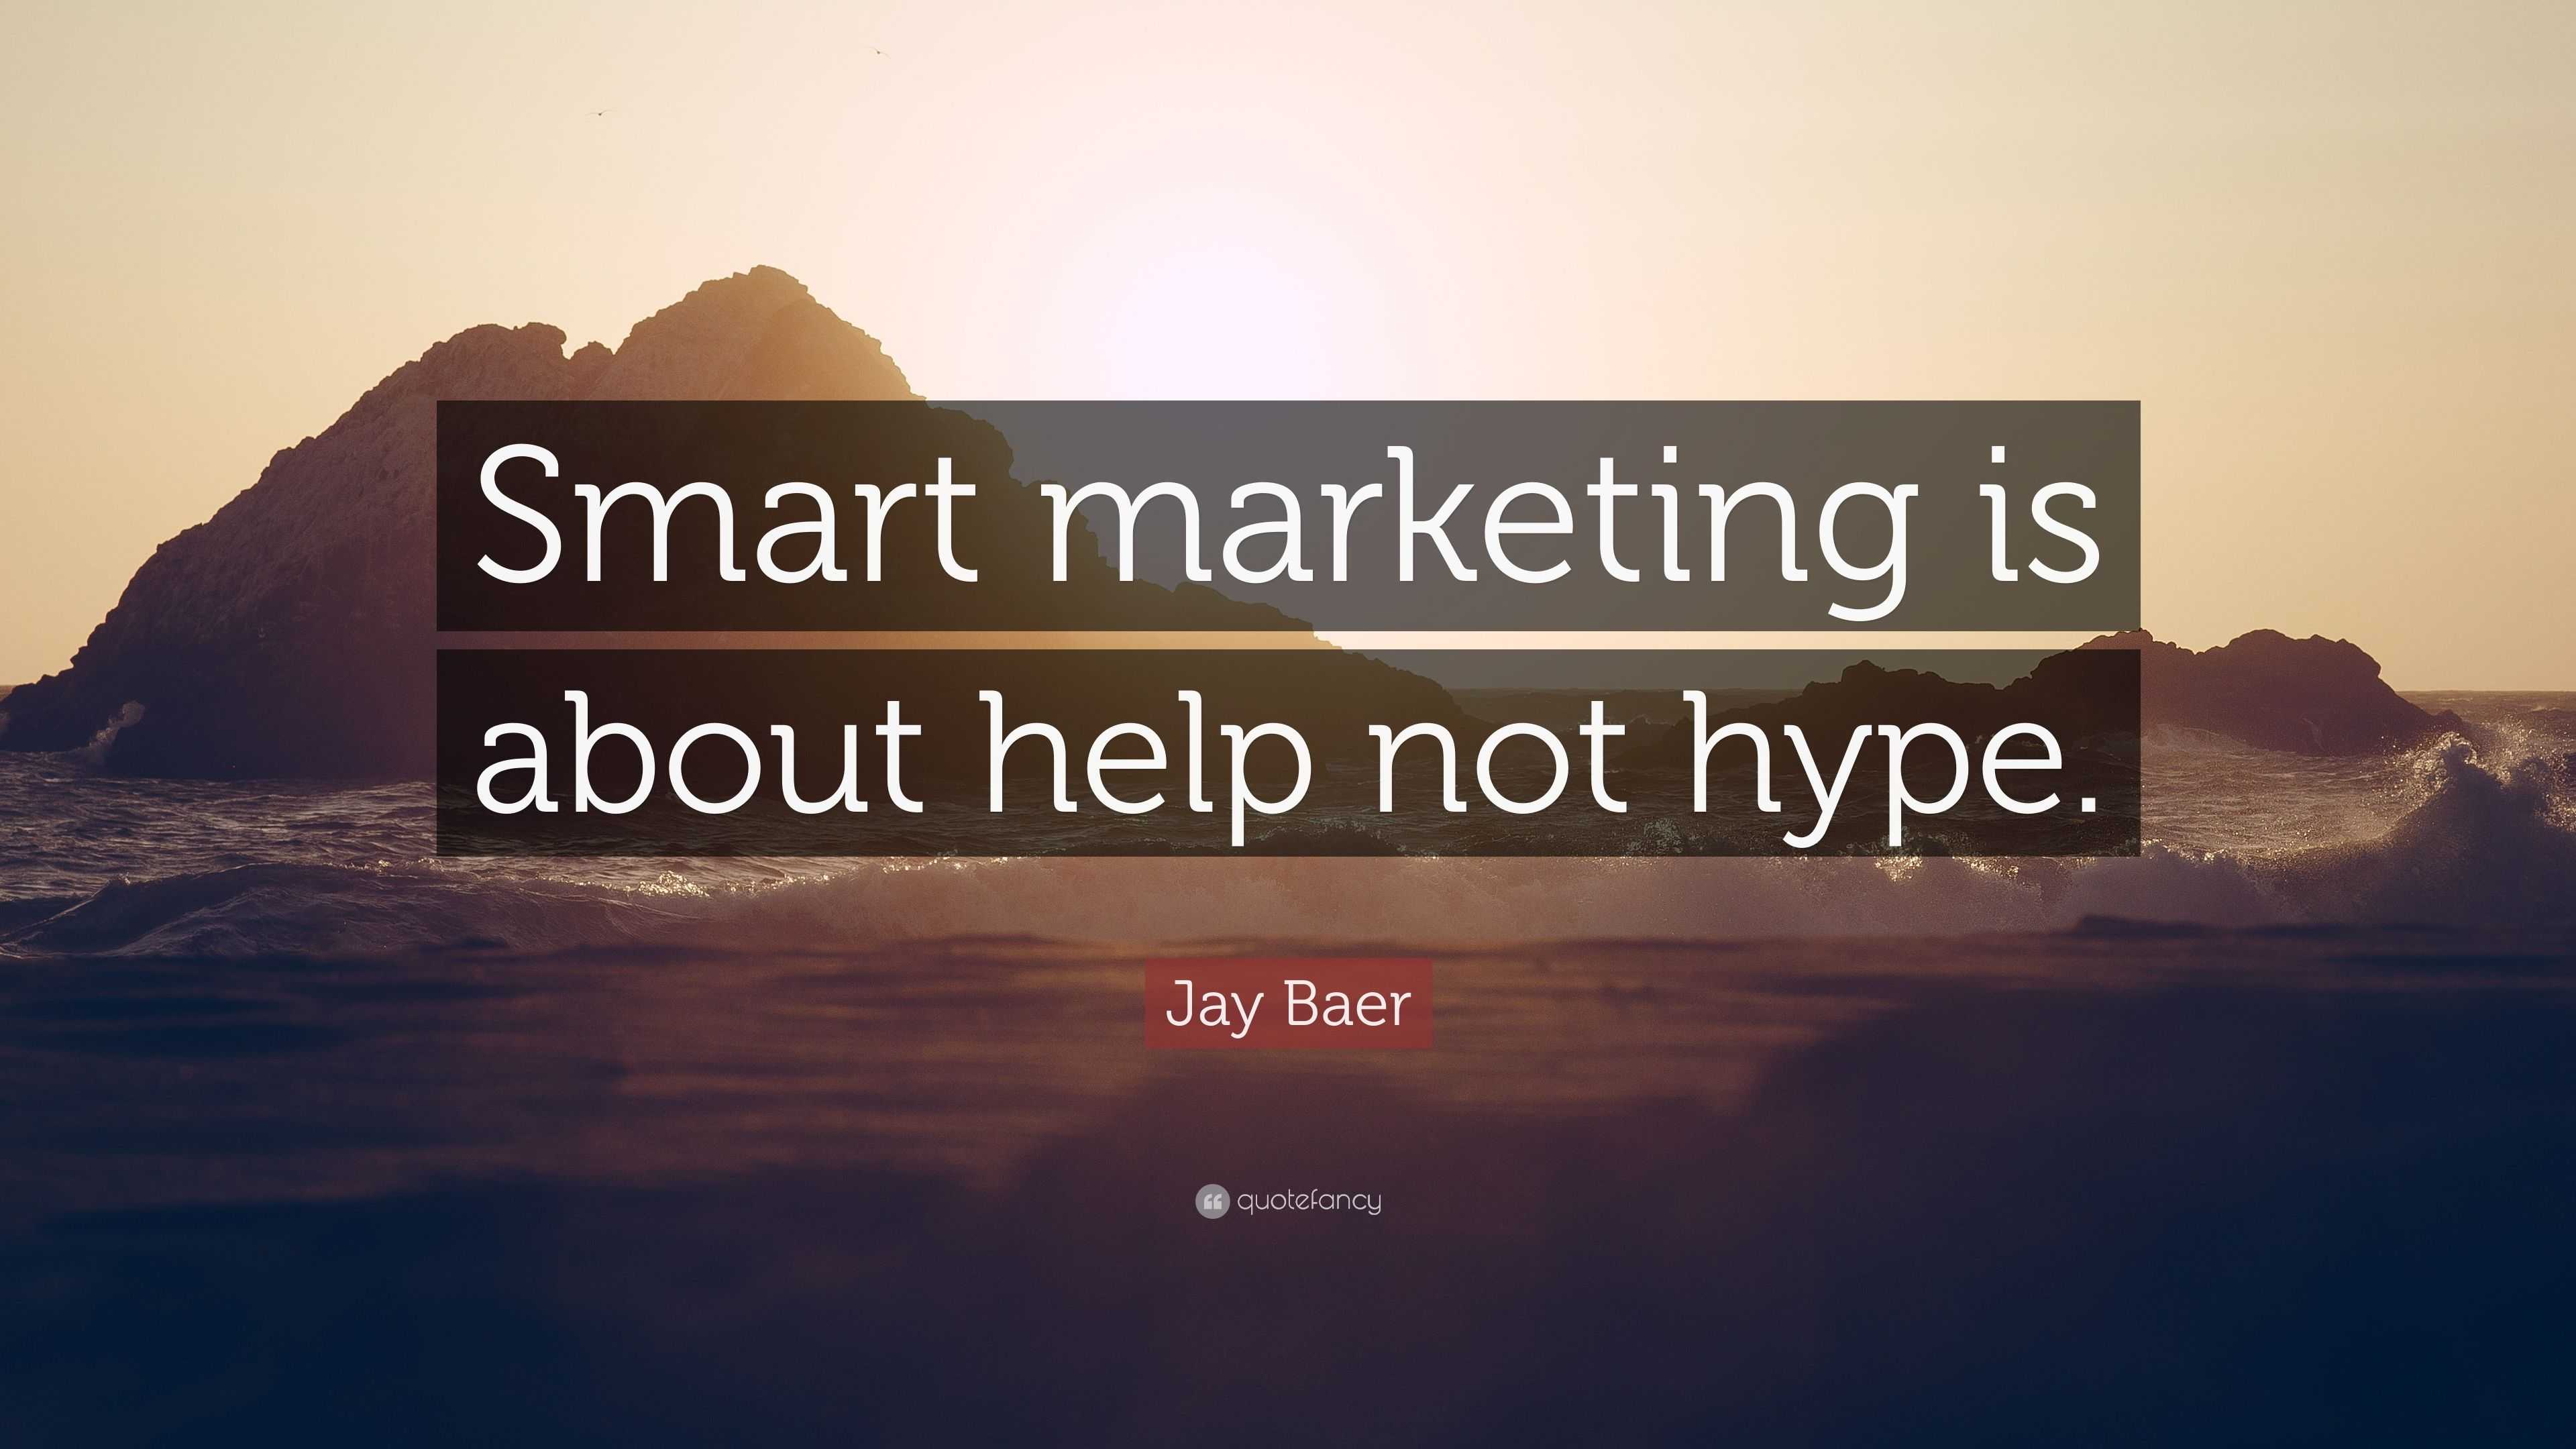 Jay Baer Quote: "Smart marketing is about help not hype."